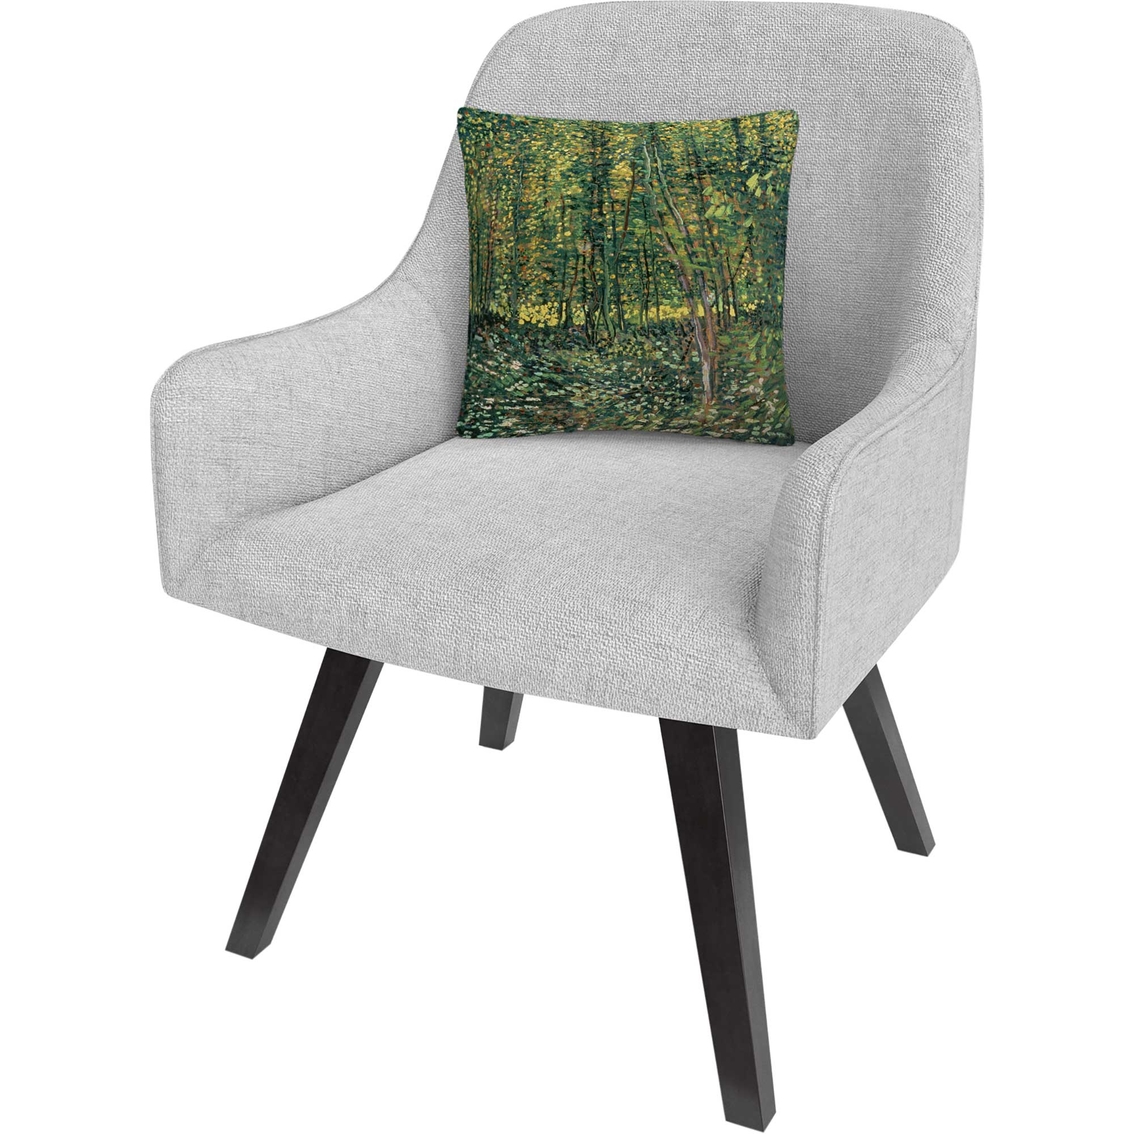 Trademark Fine Art Vincent Van Gogh Trees and Undergrowth Decorative Throw Pillow - Image 3 of 4